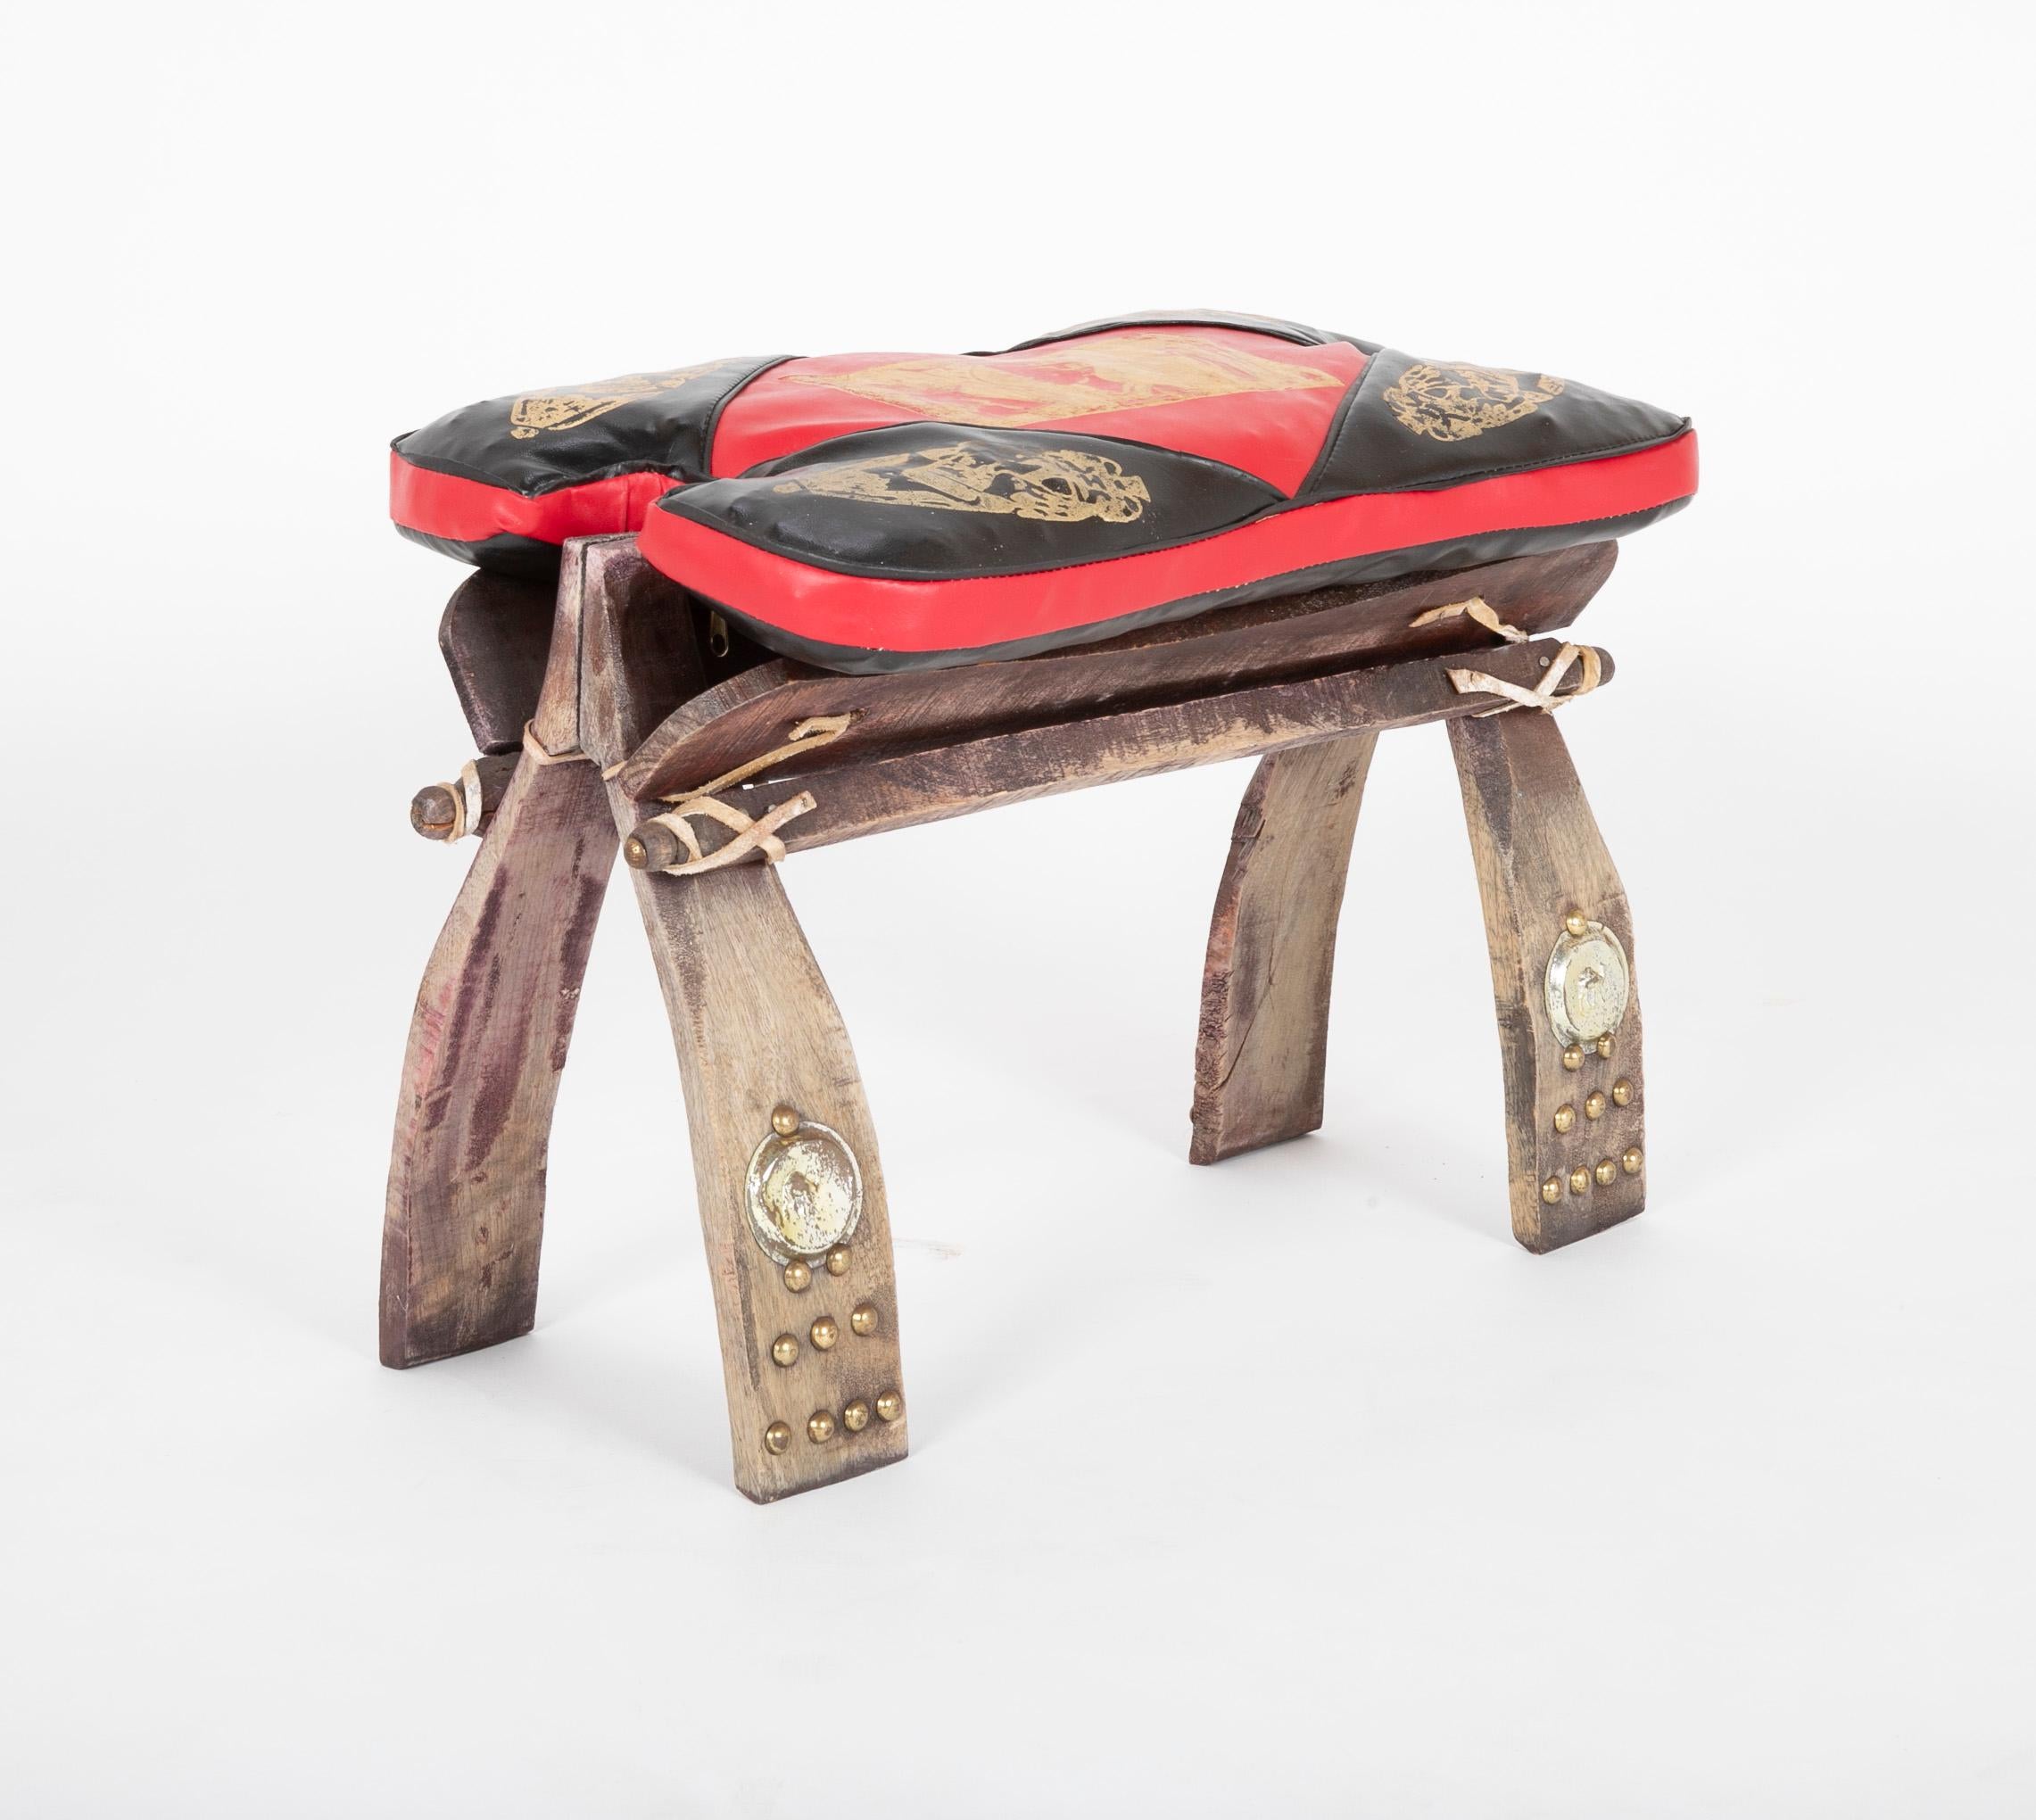 Beautifully aged leather foot stool in the form of a camel seat having brass accents.